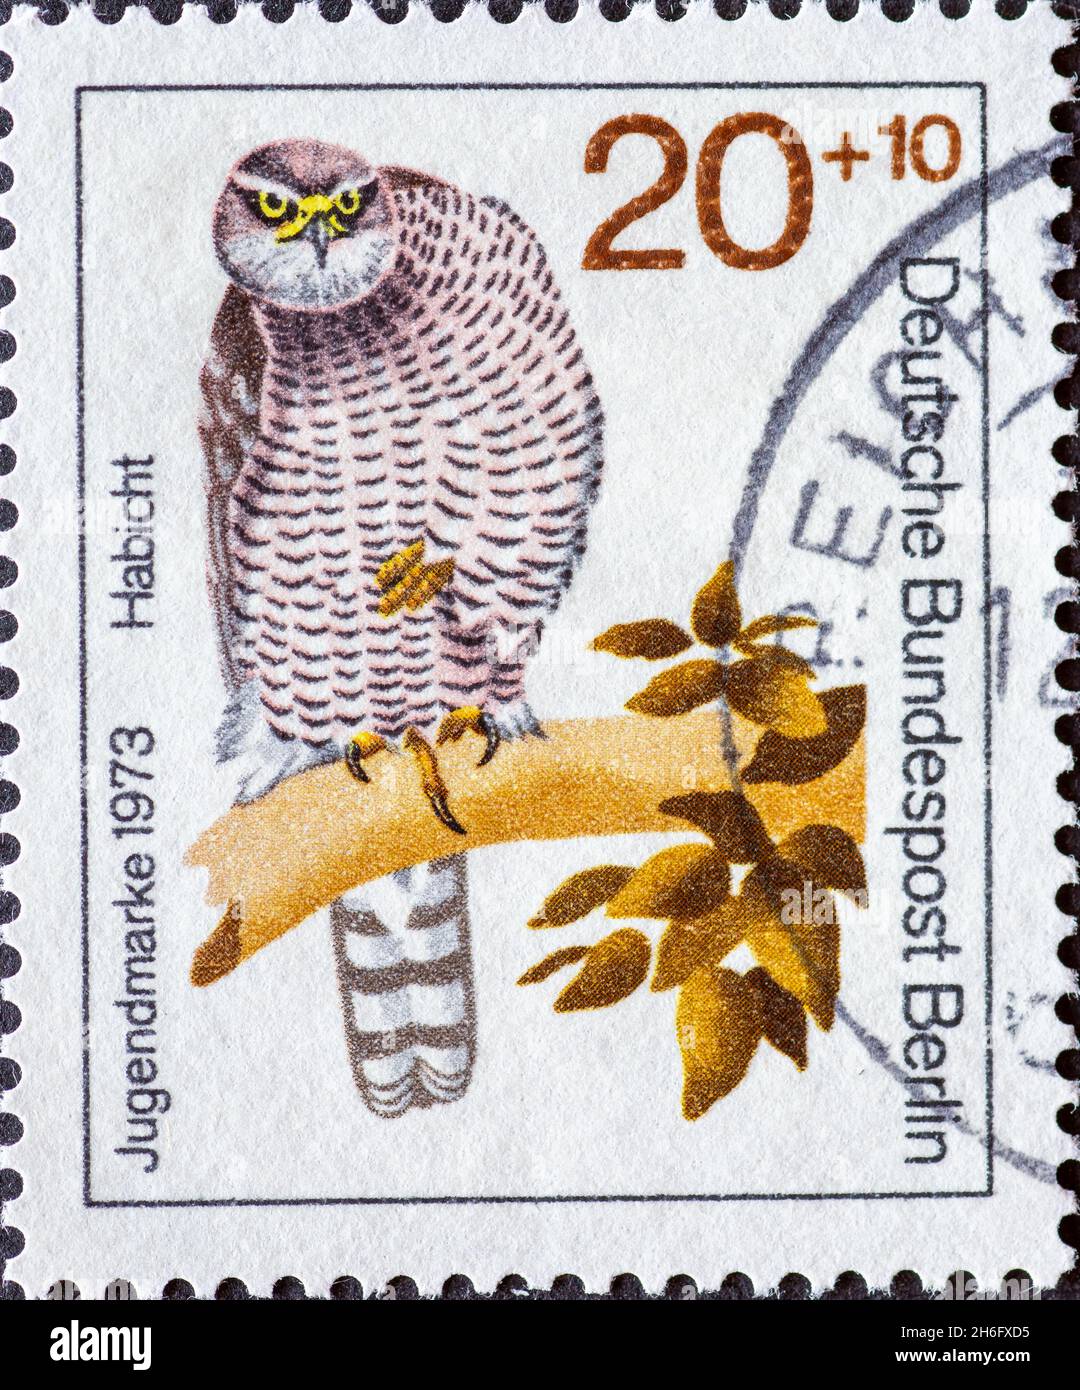 GERMANY, Berlin - CIRCA 1973: a postage stamp from Germany, Berlin showing a drawing of the bird of prey hawk. charity youth postal stamp 1973. Stock Photo